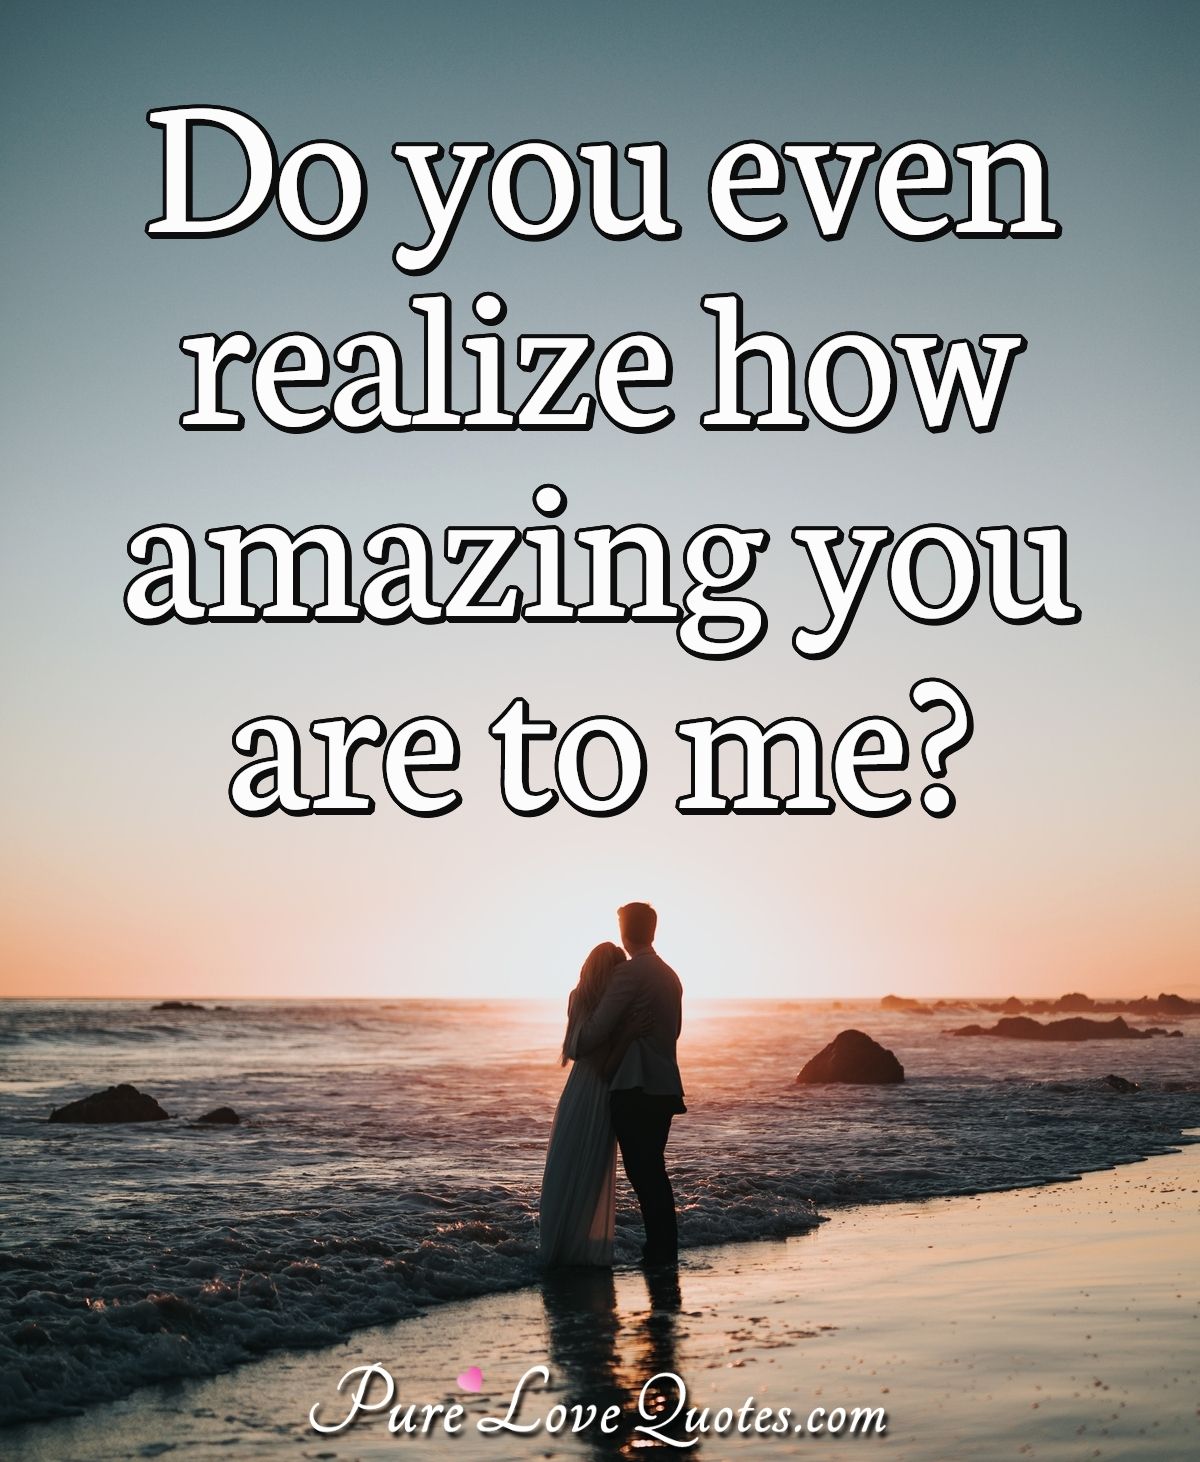 Do you even realize how amazing you are to me? - Anonymous